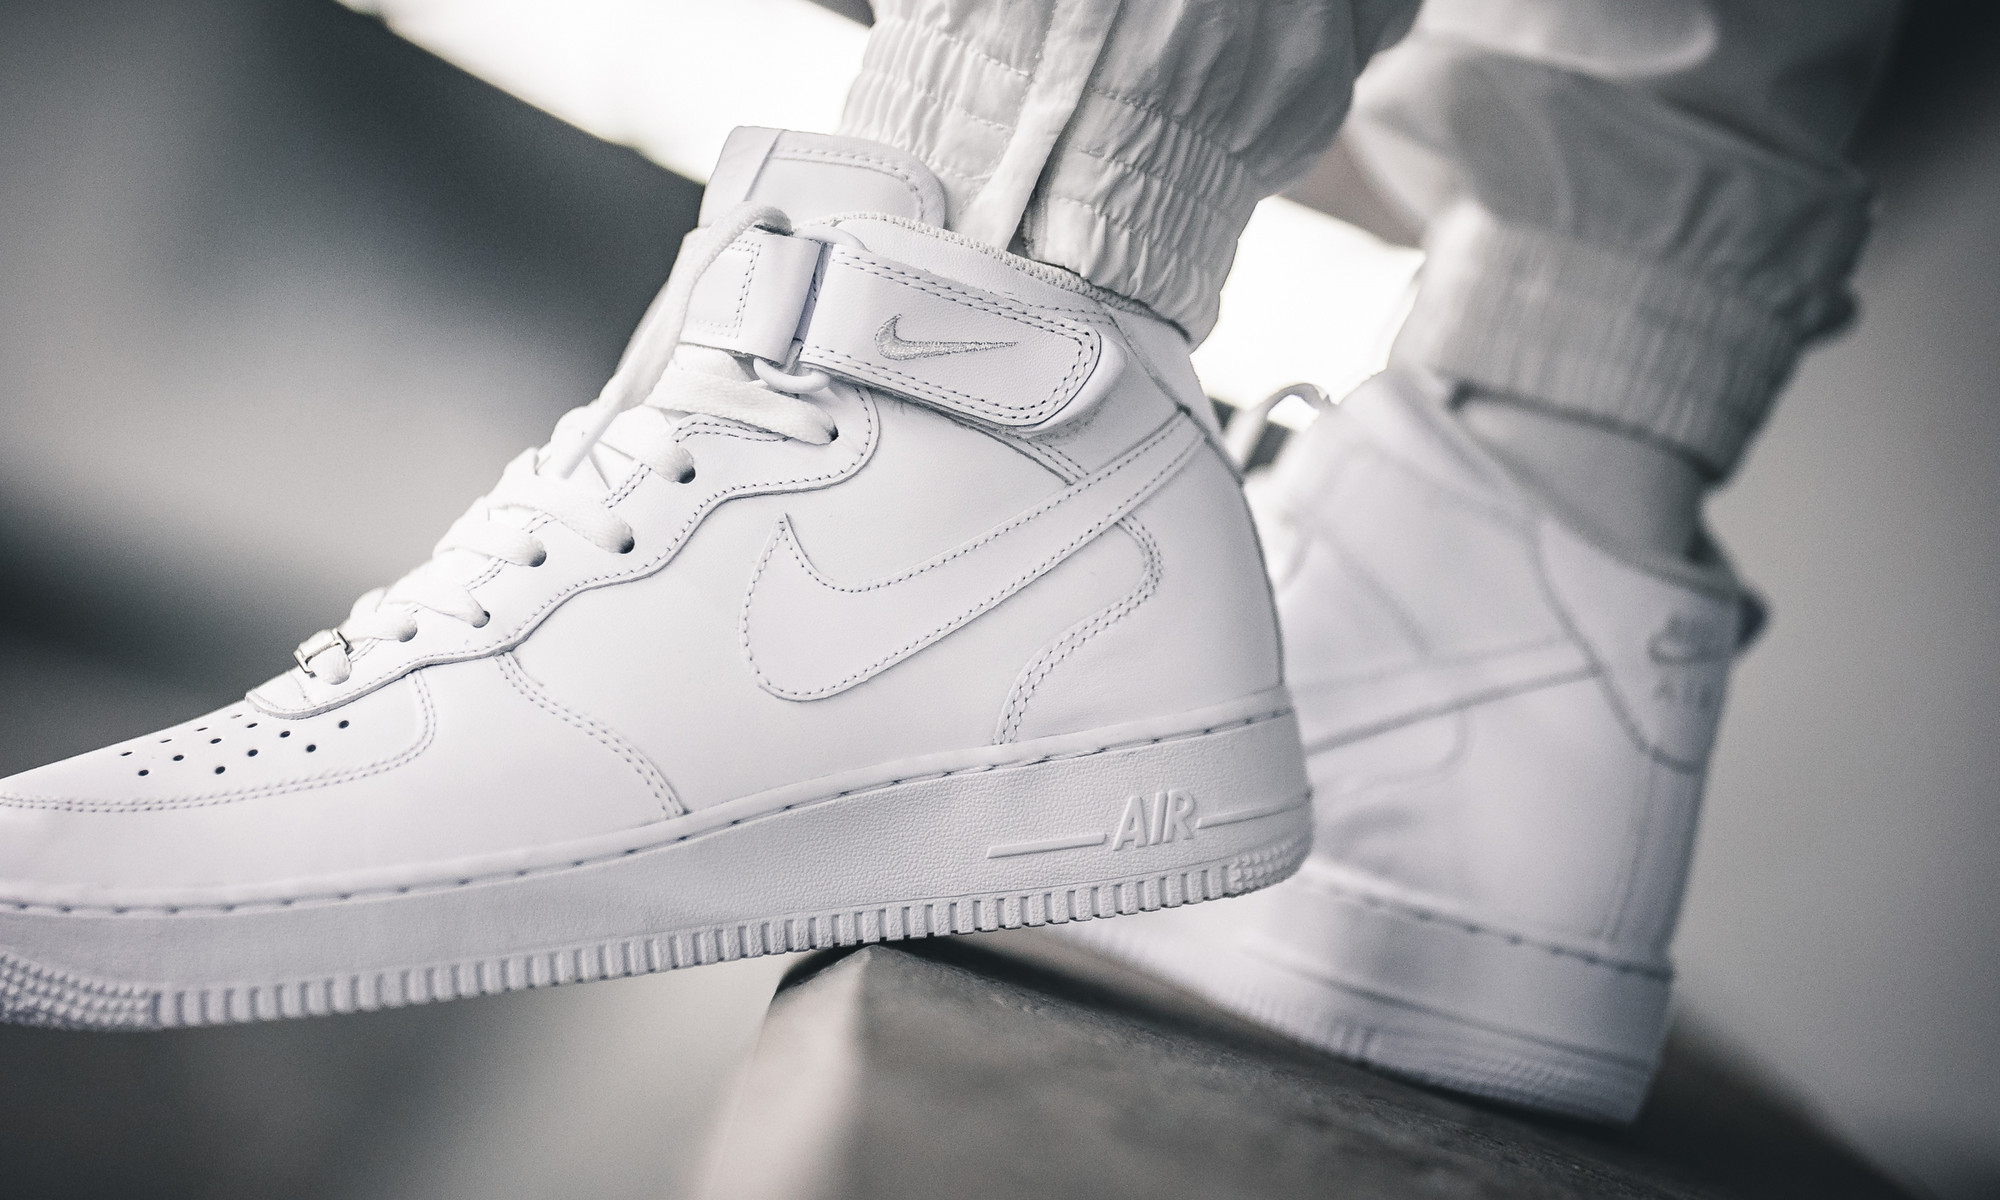 Nike Air Force 1 High White 315123-111 Made In Vietnam￼ AF1 Size 12 Uk11  EU46